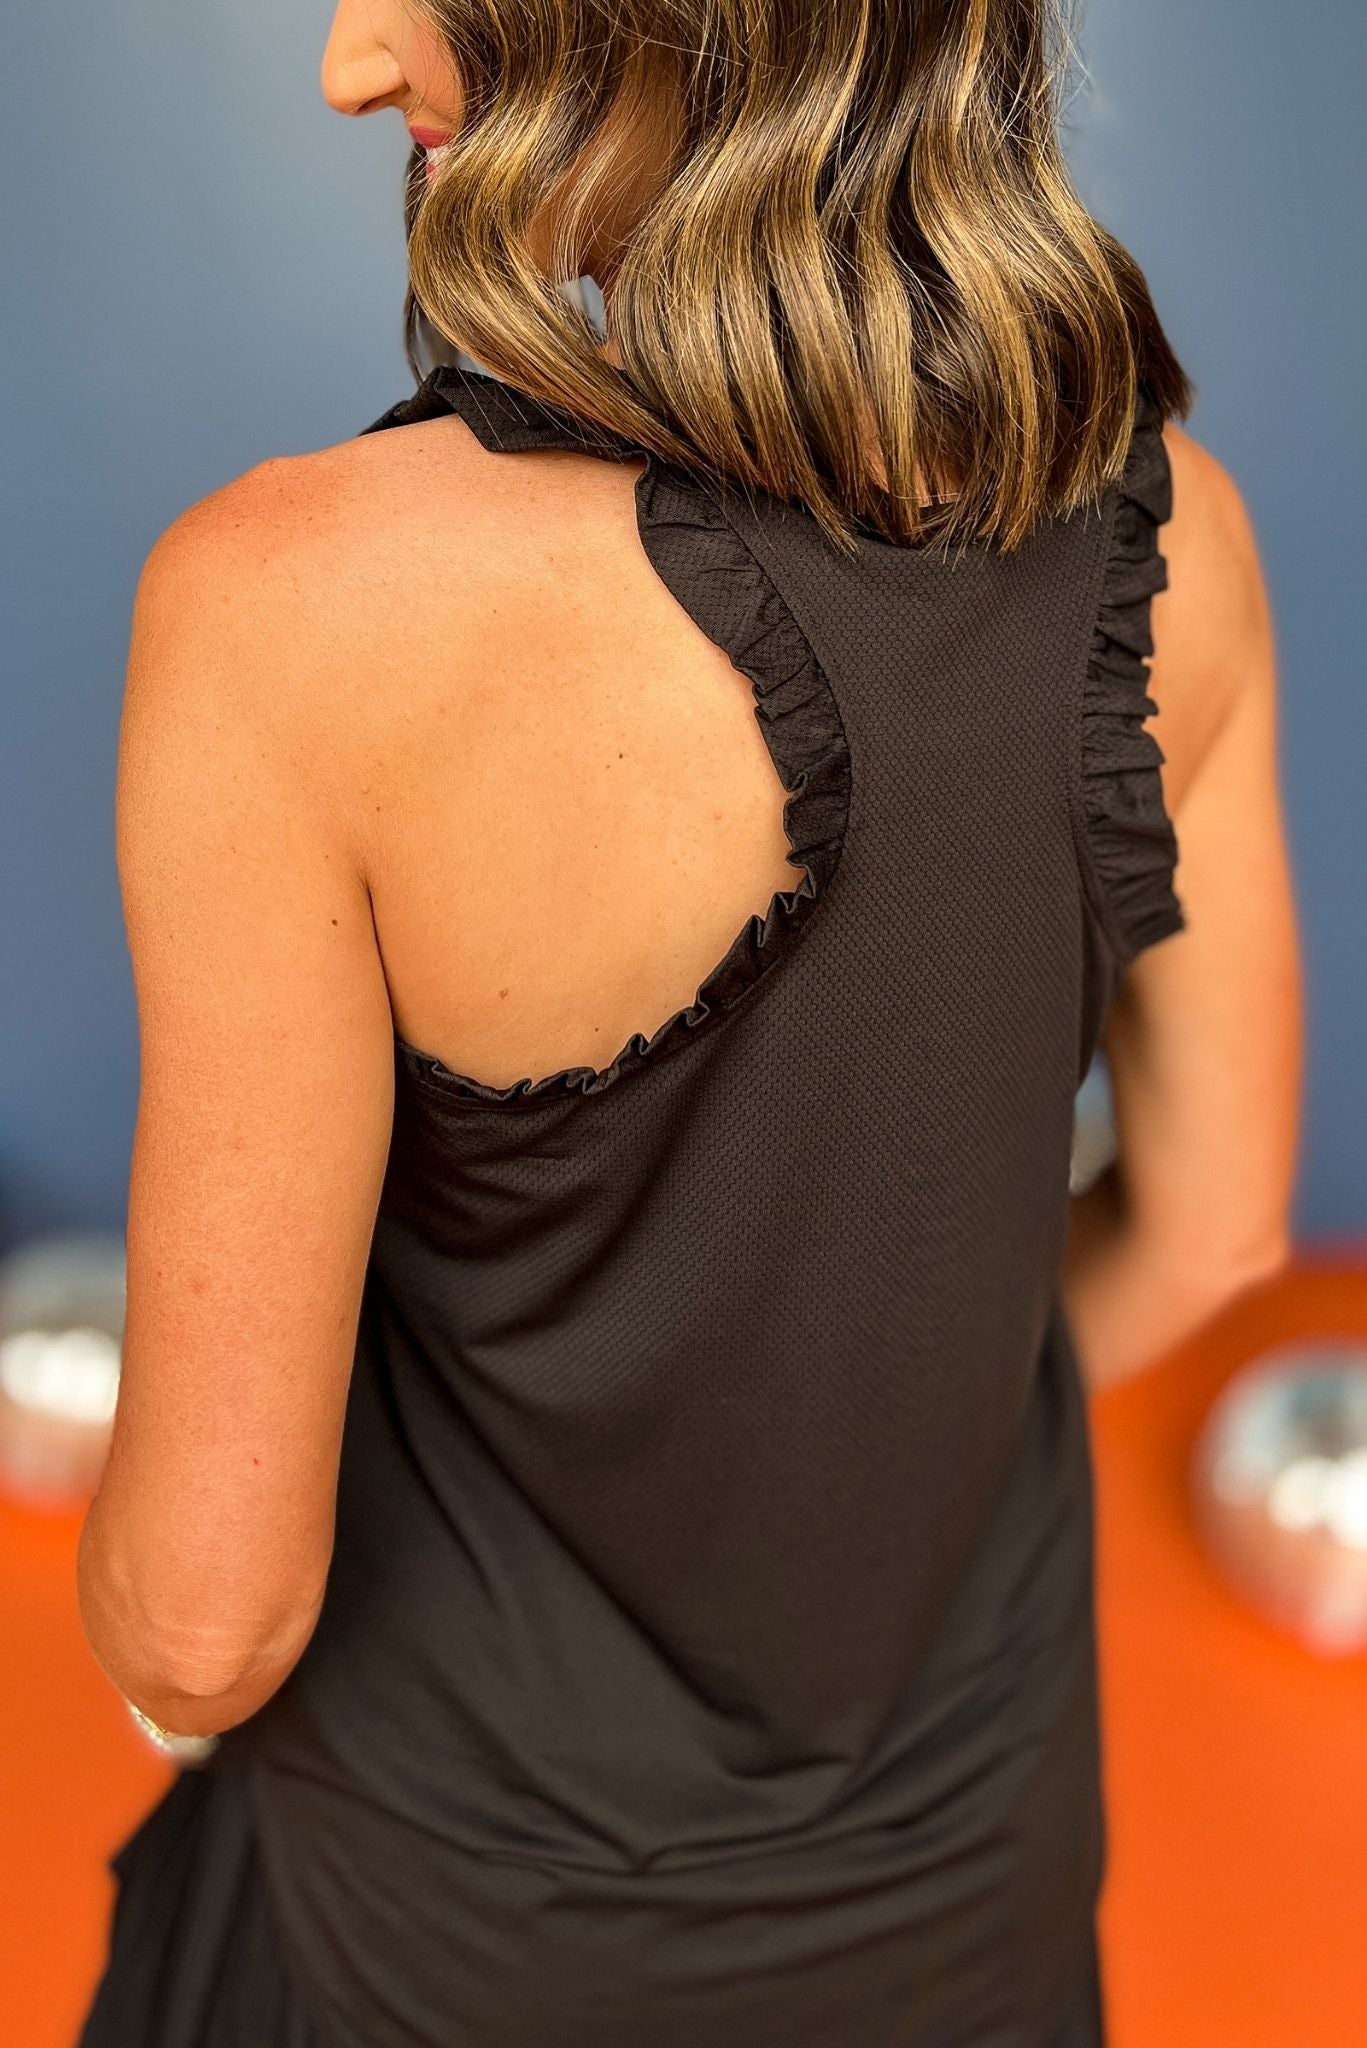 SSYS Black Ruffle Racerback Honeycomb Active Tank Top, Ssys athlesiure, Spring athleisure, athleisure, elevated athleisure, must have tank top , athletic tank top, athletic style, mom style, shop style your senses by mallory fitzsimmons, ssys by mallory fitzsimmons